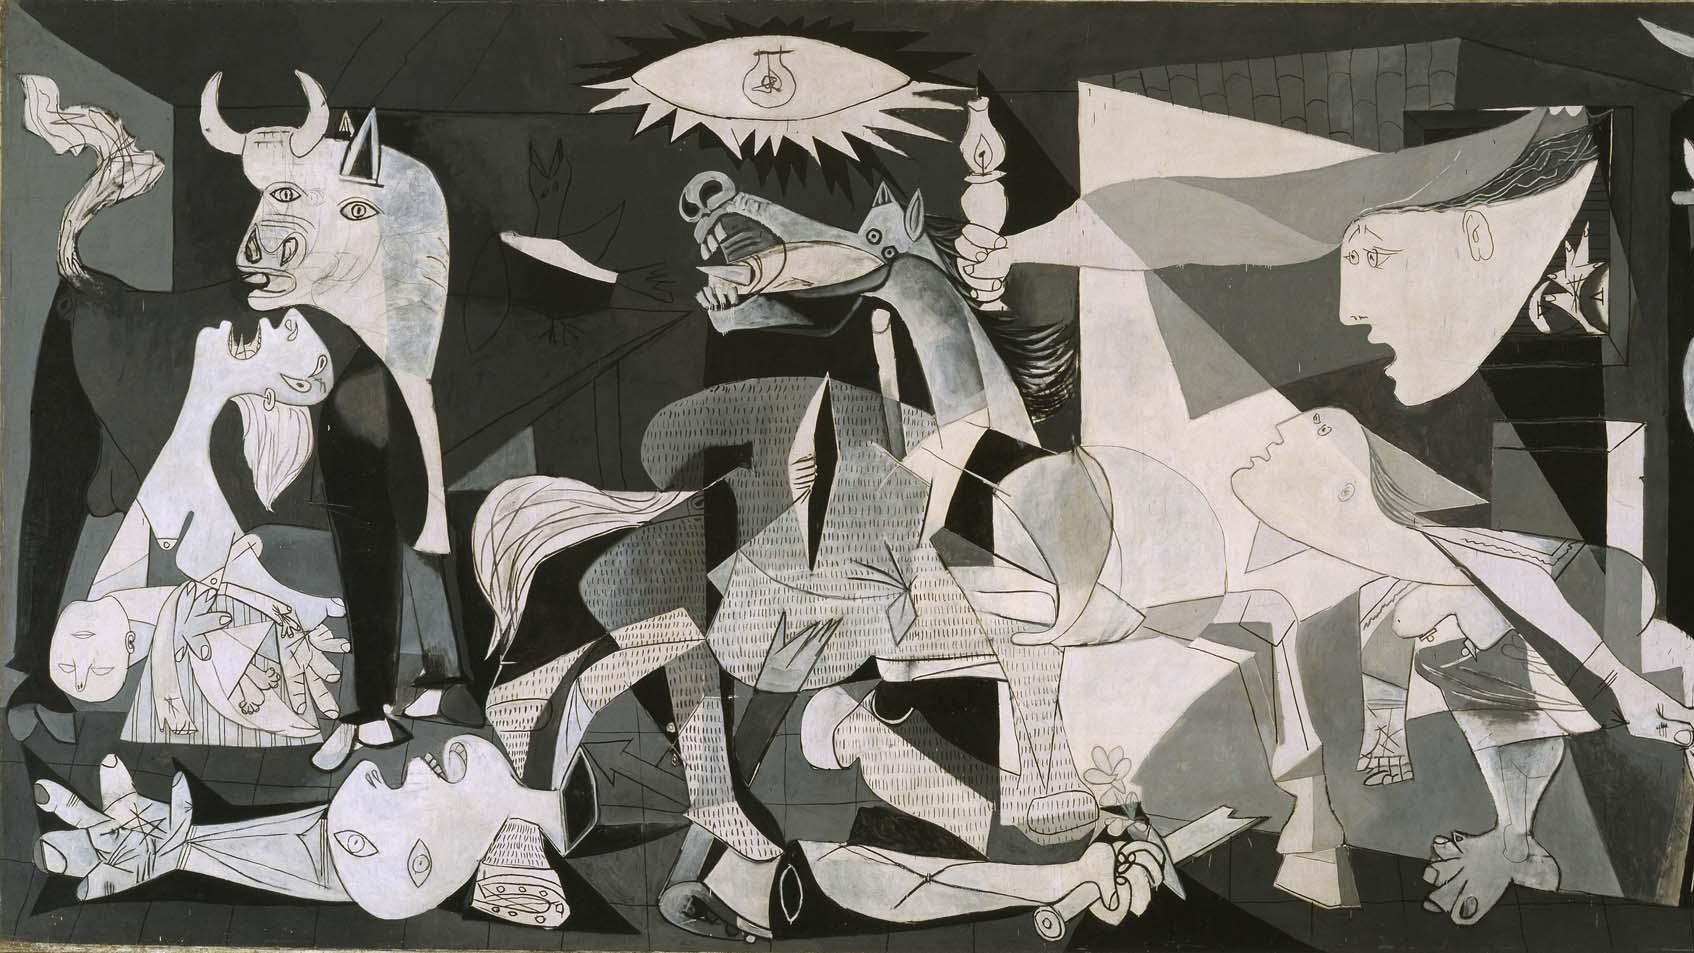 A famous black and white painting.